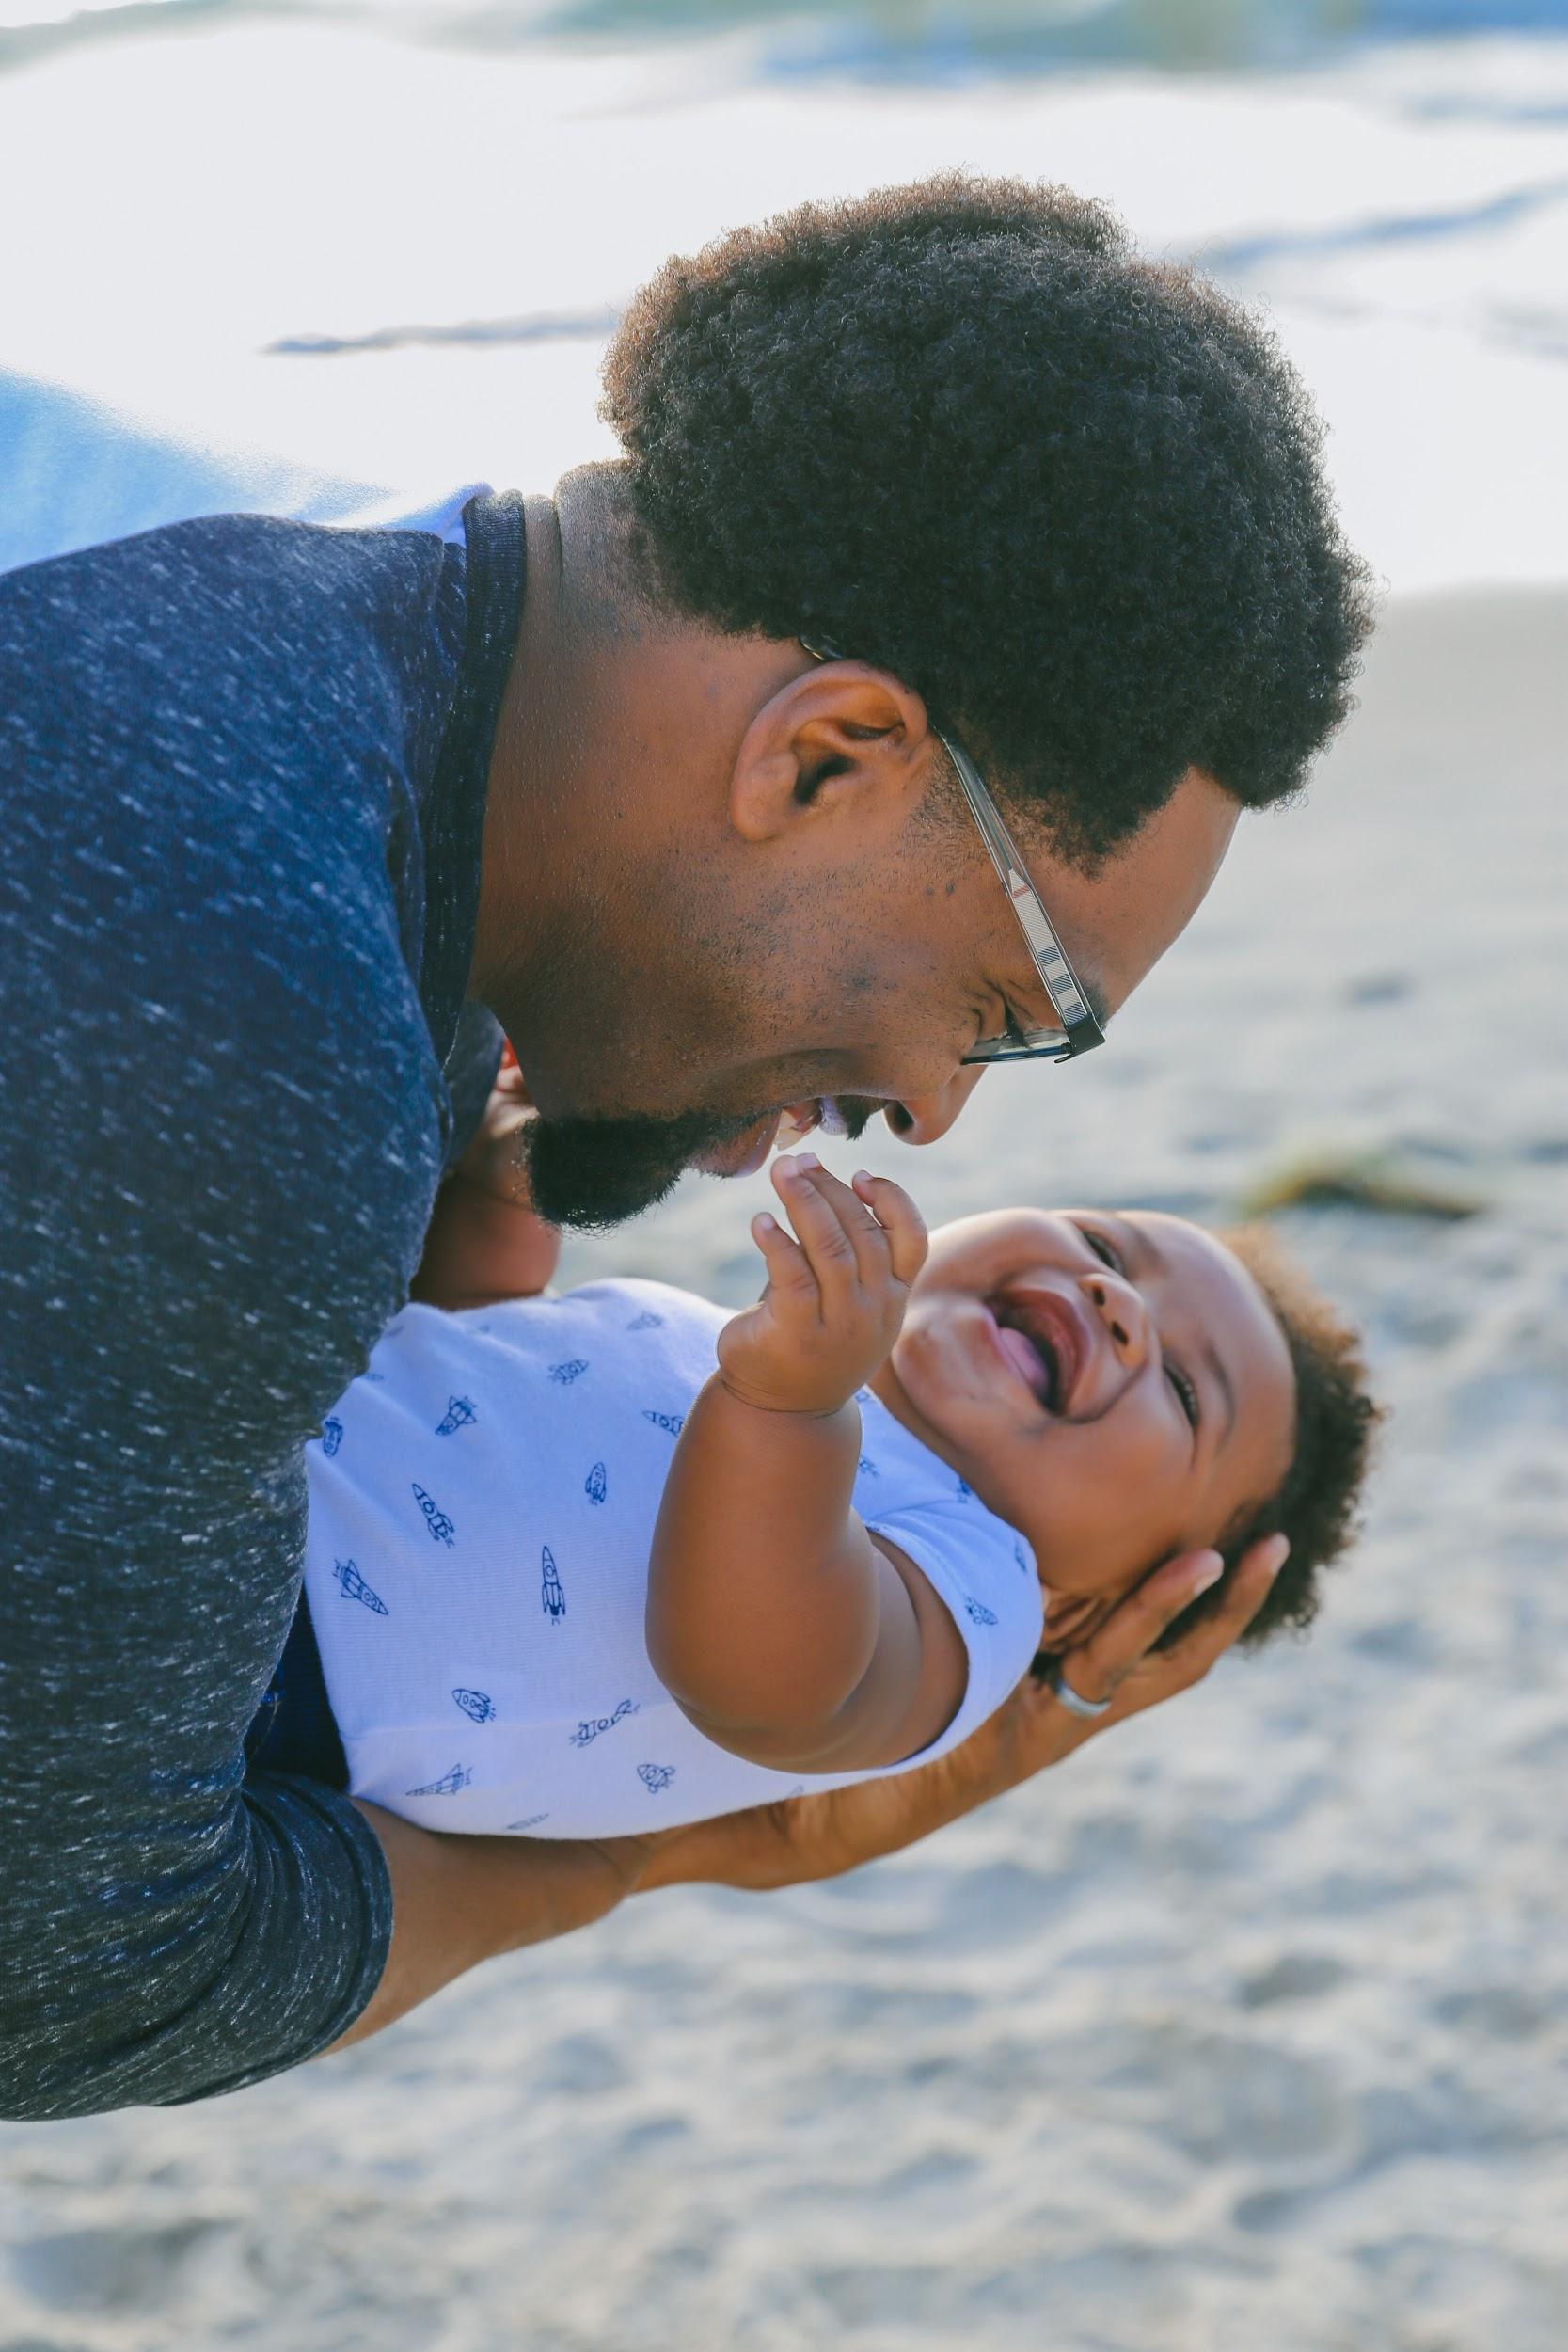 A Black father with facial hair and glasses holds his baby playfully on the beach. The father is smiling warmly, and the baby is laughing.